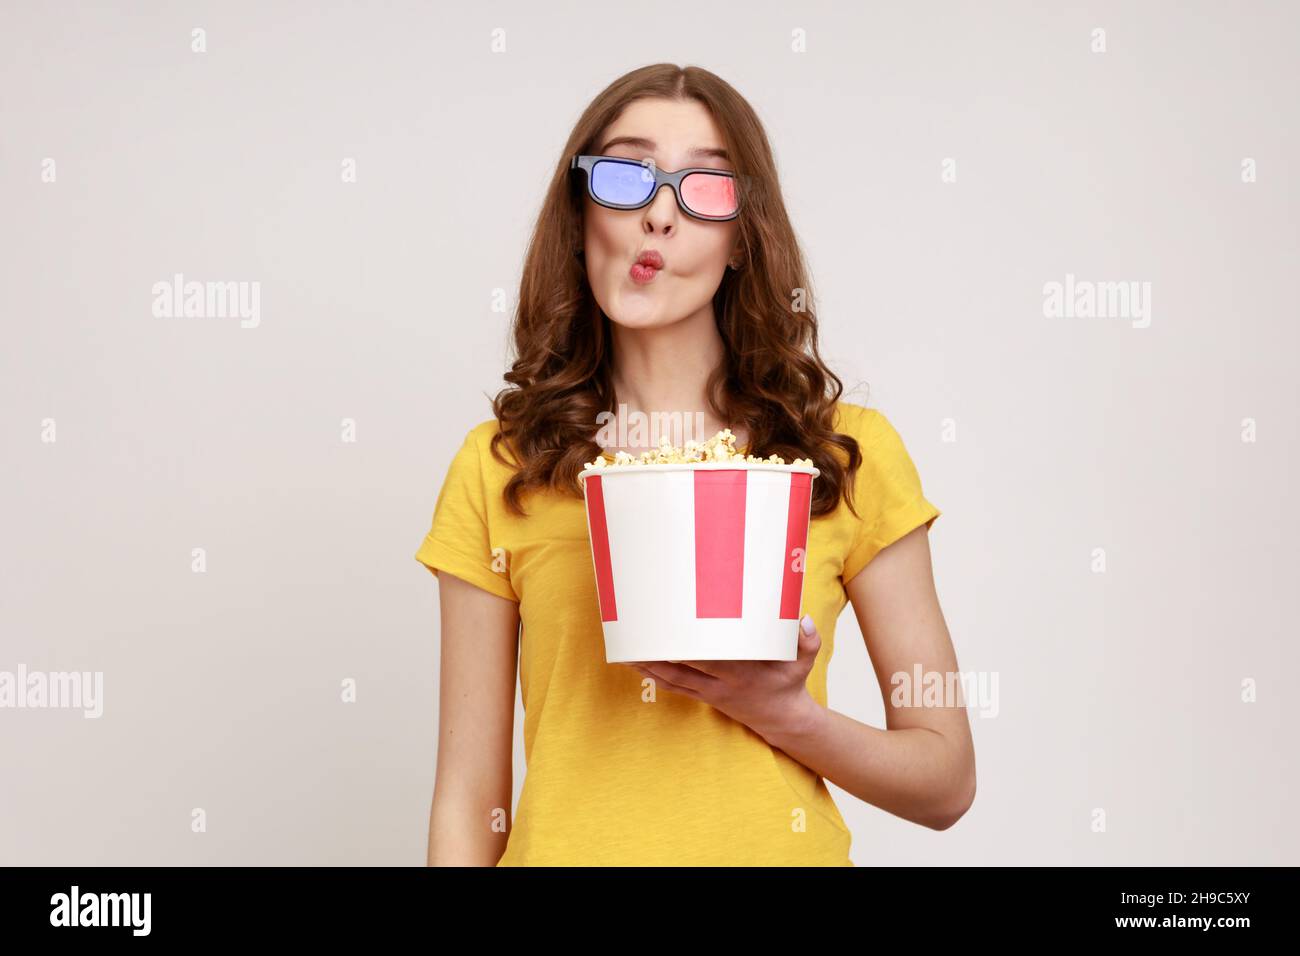 Young childish woman in 3d glasses and yellow casual t-shirt, watching movie film, holding bucket of popcorn, making fish face grimace with pout lips. Indoor studio shot isolated on gray background. Stock Photo